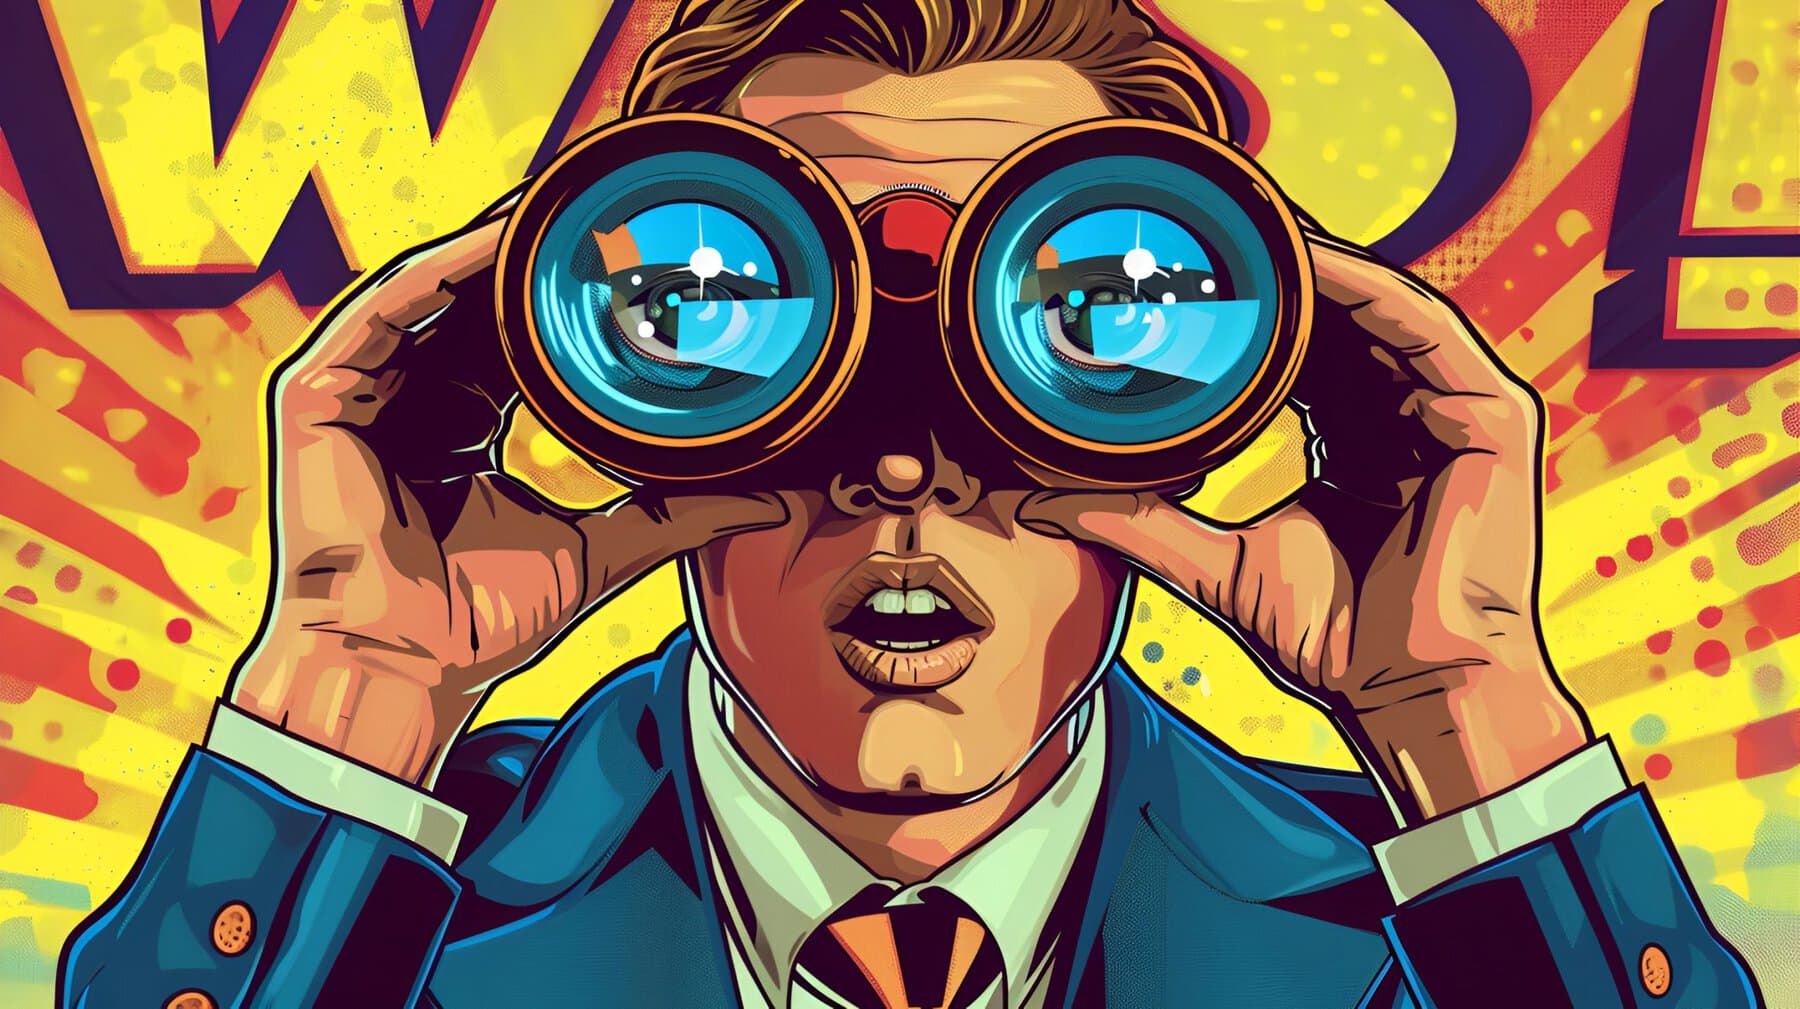 Man In Suit, Wow Concept, Wow pop art man. Young surprised man in suit with open smile holding binoculars in his hands with inscription wow in reflection. Vector illustration in retro comic style,